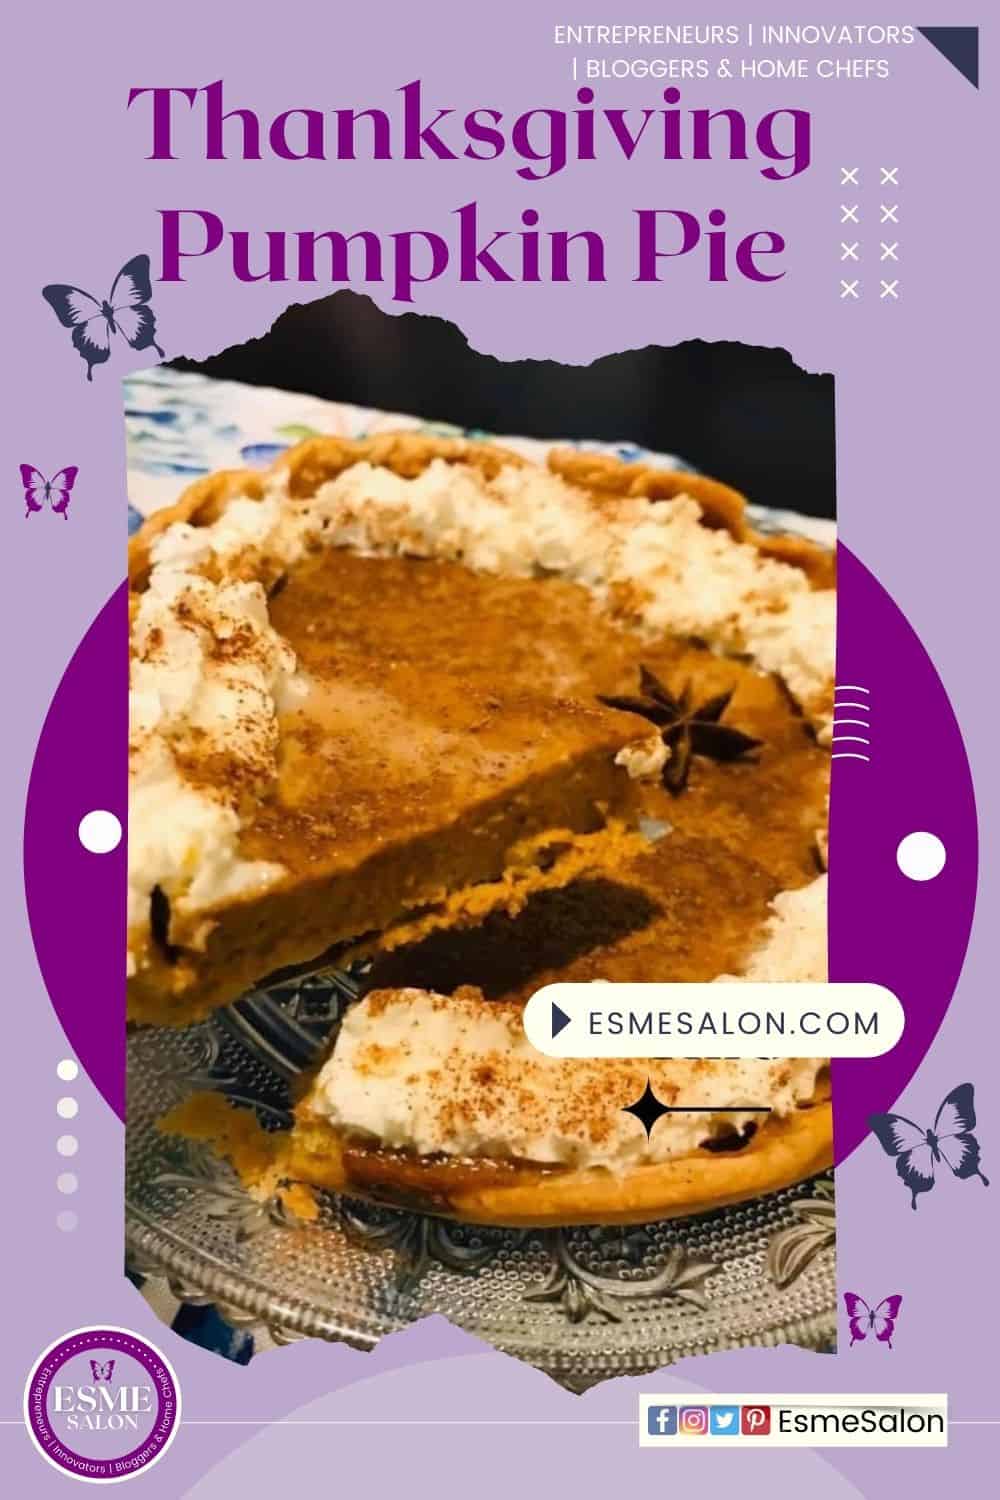 An image of pumpkin pie slices for Thanksgiving